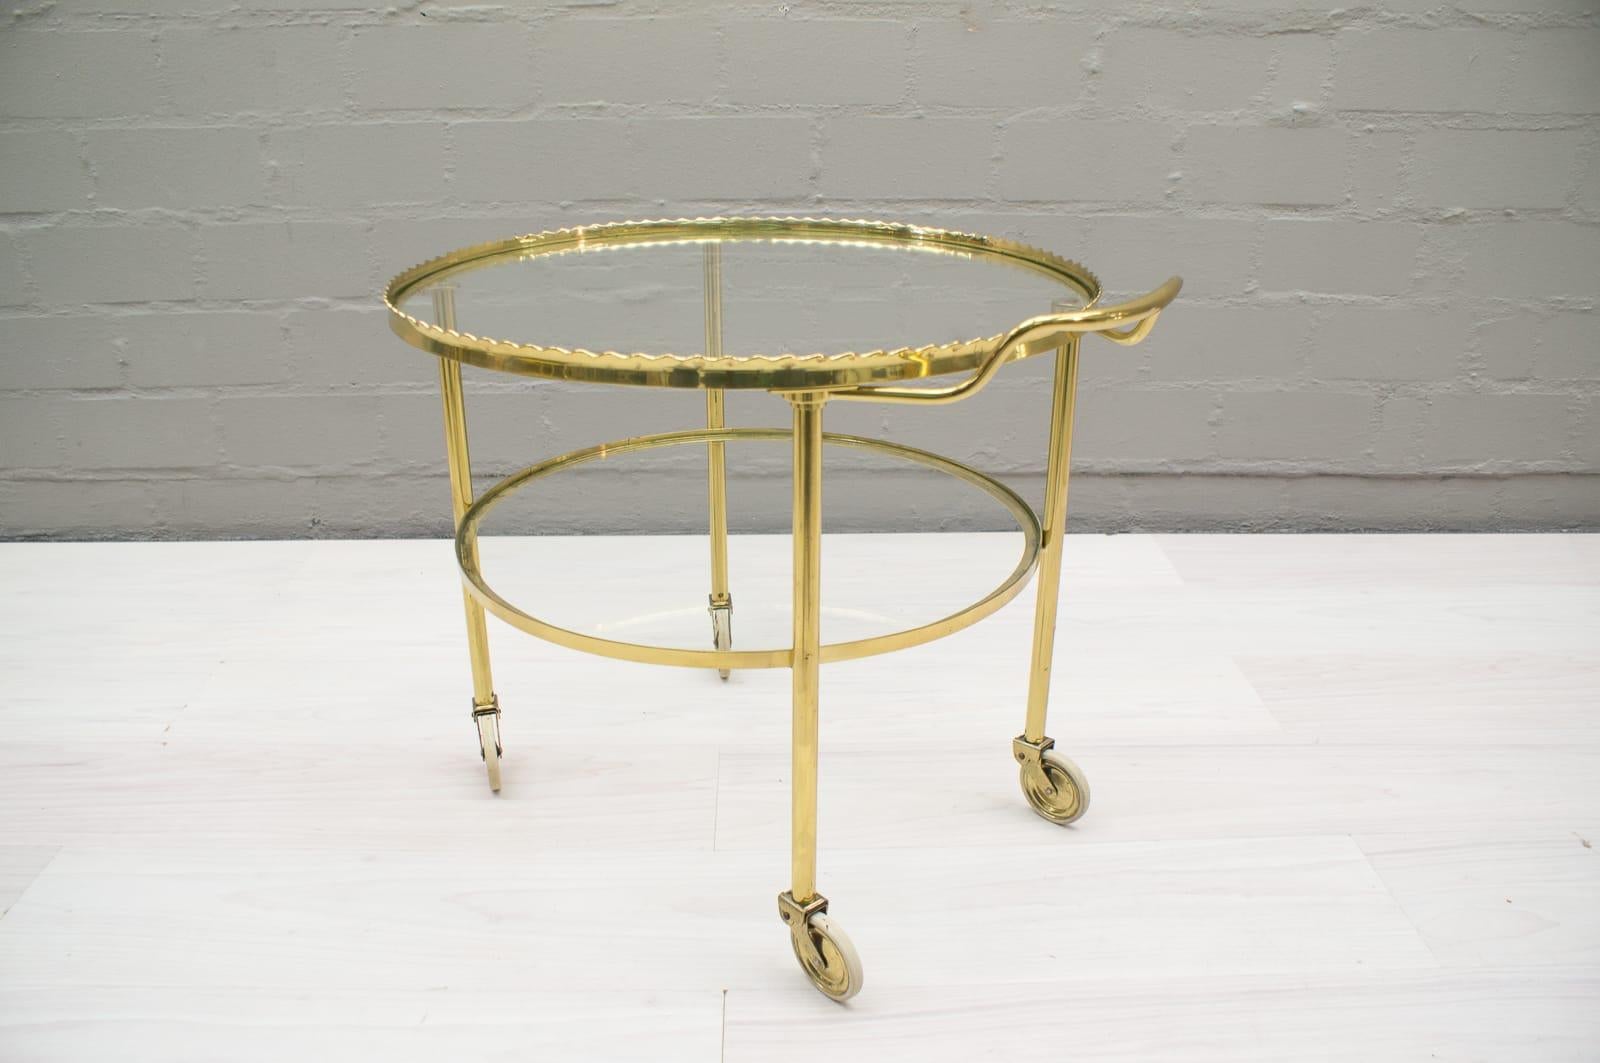 A very beautiful, filigree and elegant serving trolley from the Vereinigte Münchener Werstätten manufactory. 

The brass has a typical patina, see pictures.